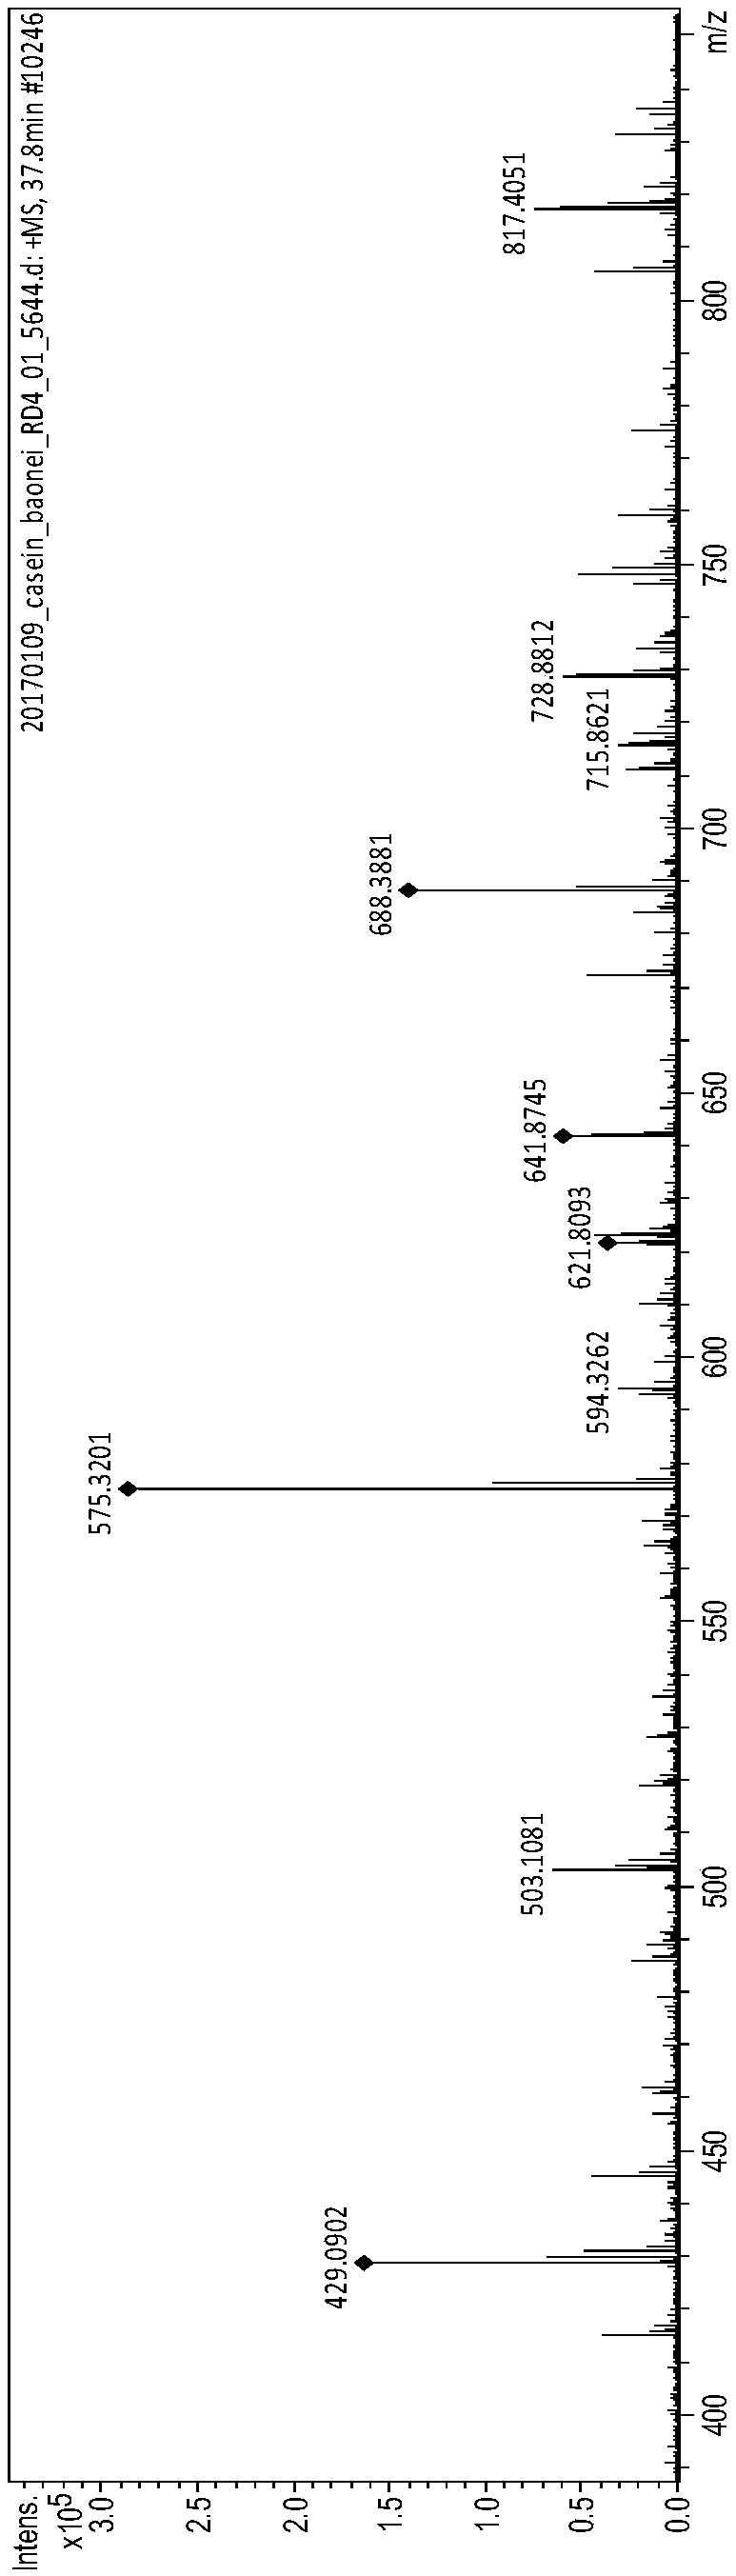 Bioactive polypeptide DKLAQ as well as preparation method and application thereof